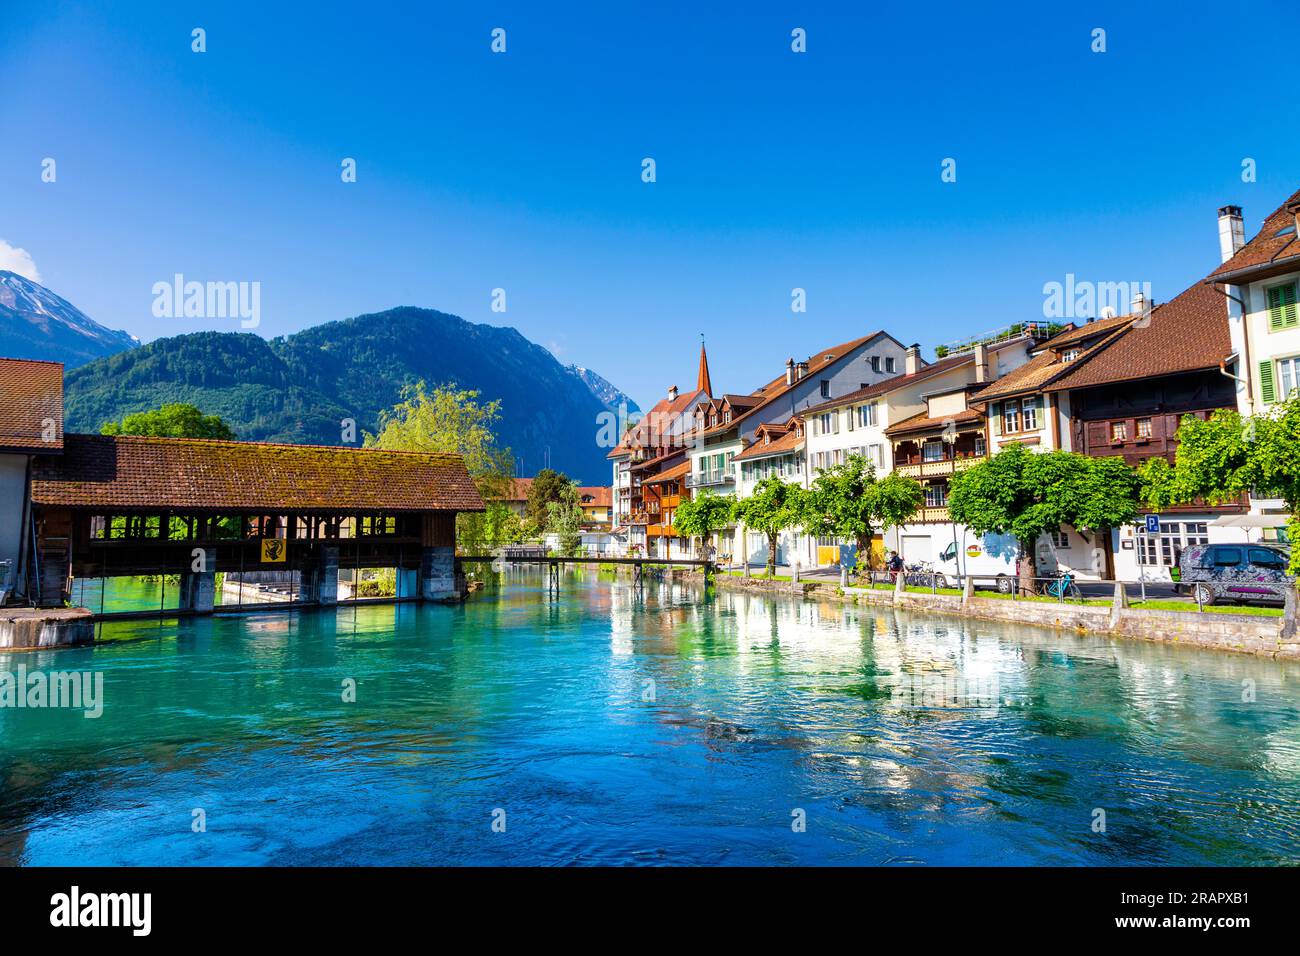 Grosse Staatsschleuse covered bridge, houses at the riverside of the Aare River, Unterseen, Switzerland Stock Photo